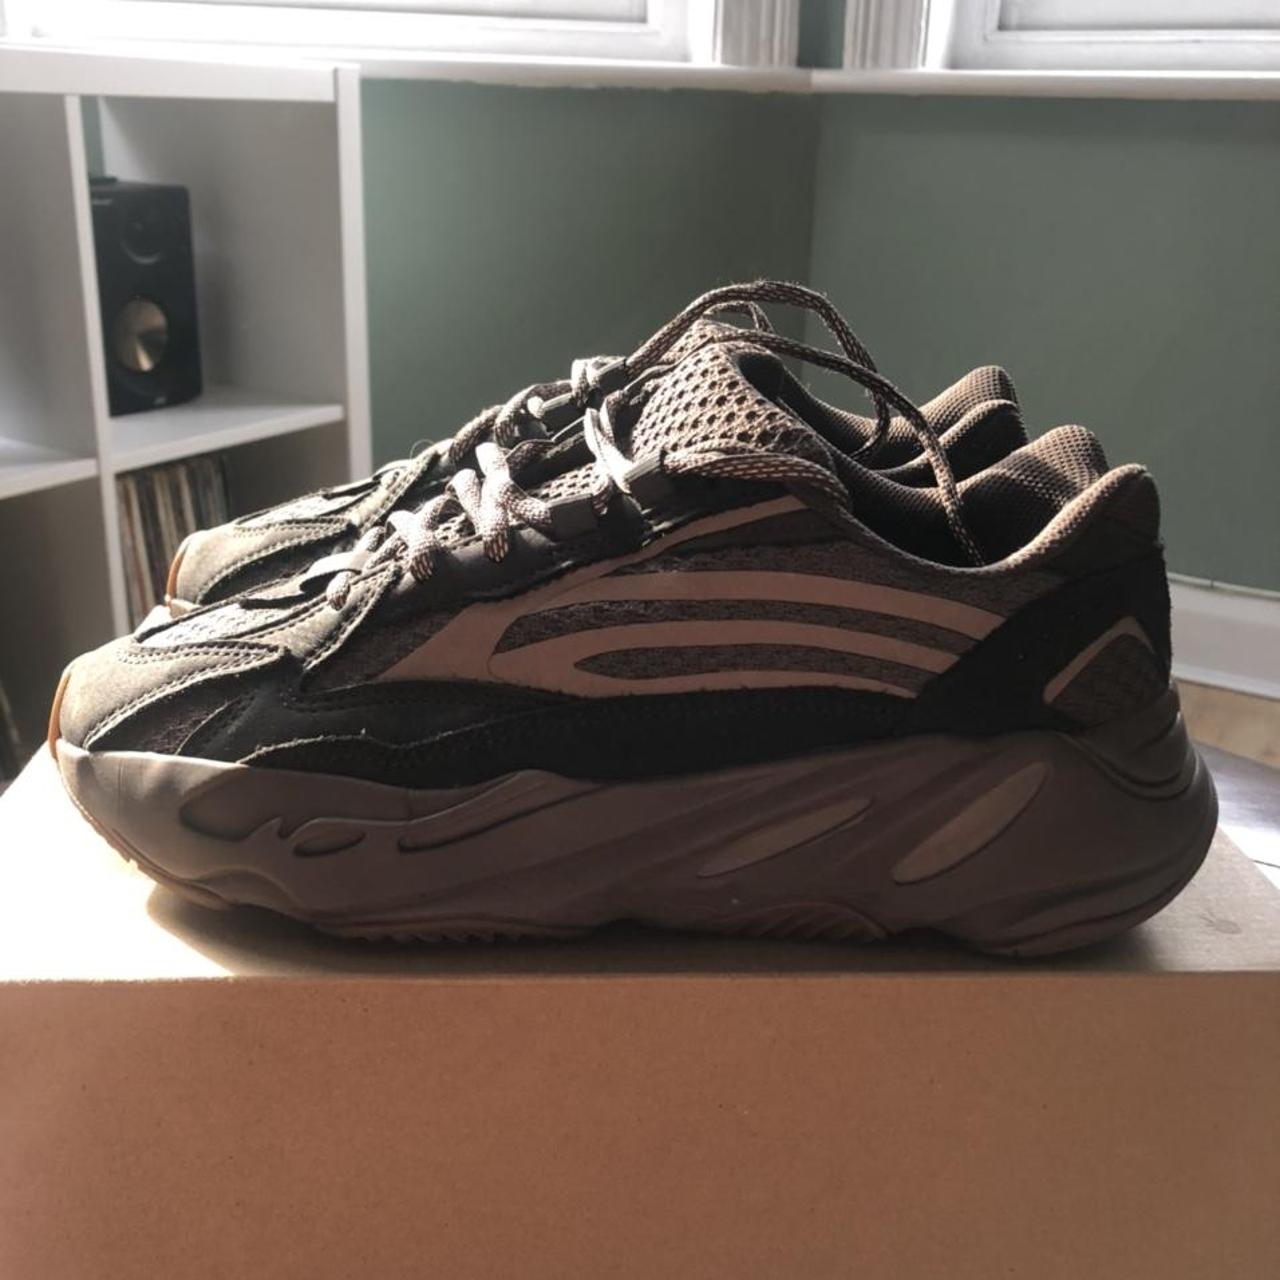 enough medley Viscous Yeezy 700 V2 mauve in amazing condition. Bought from... - Depop